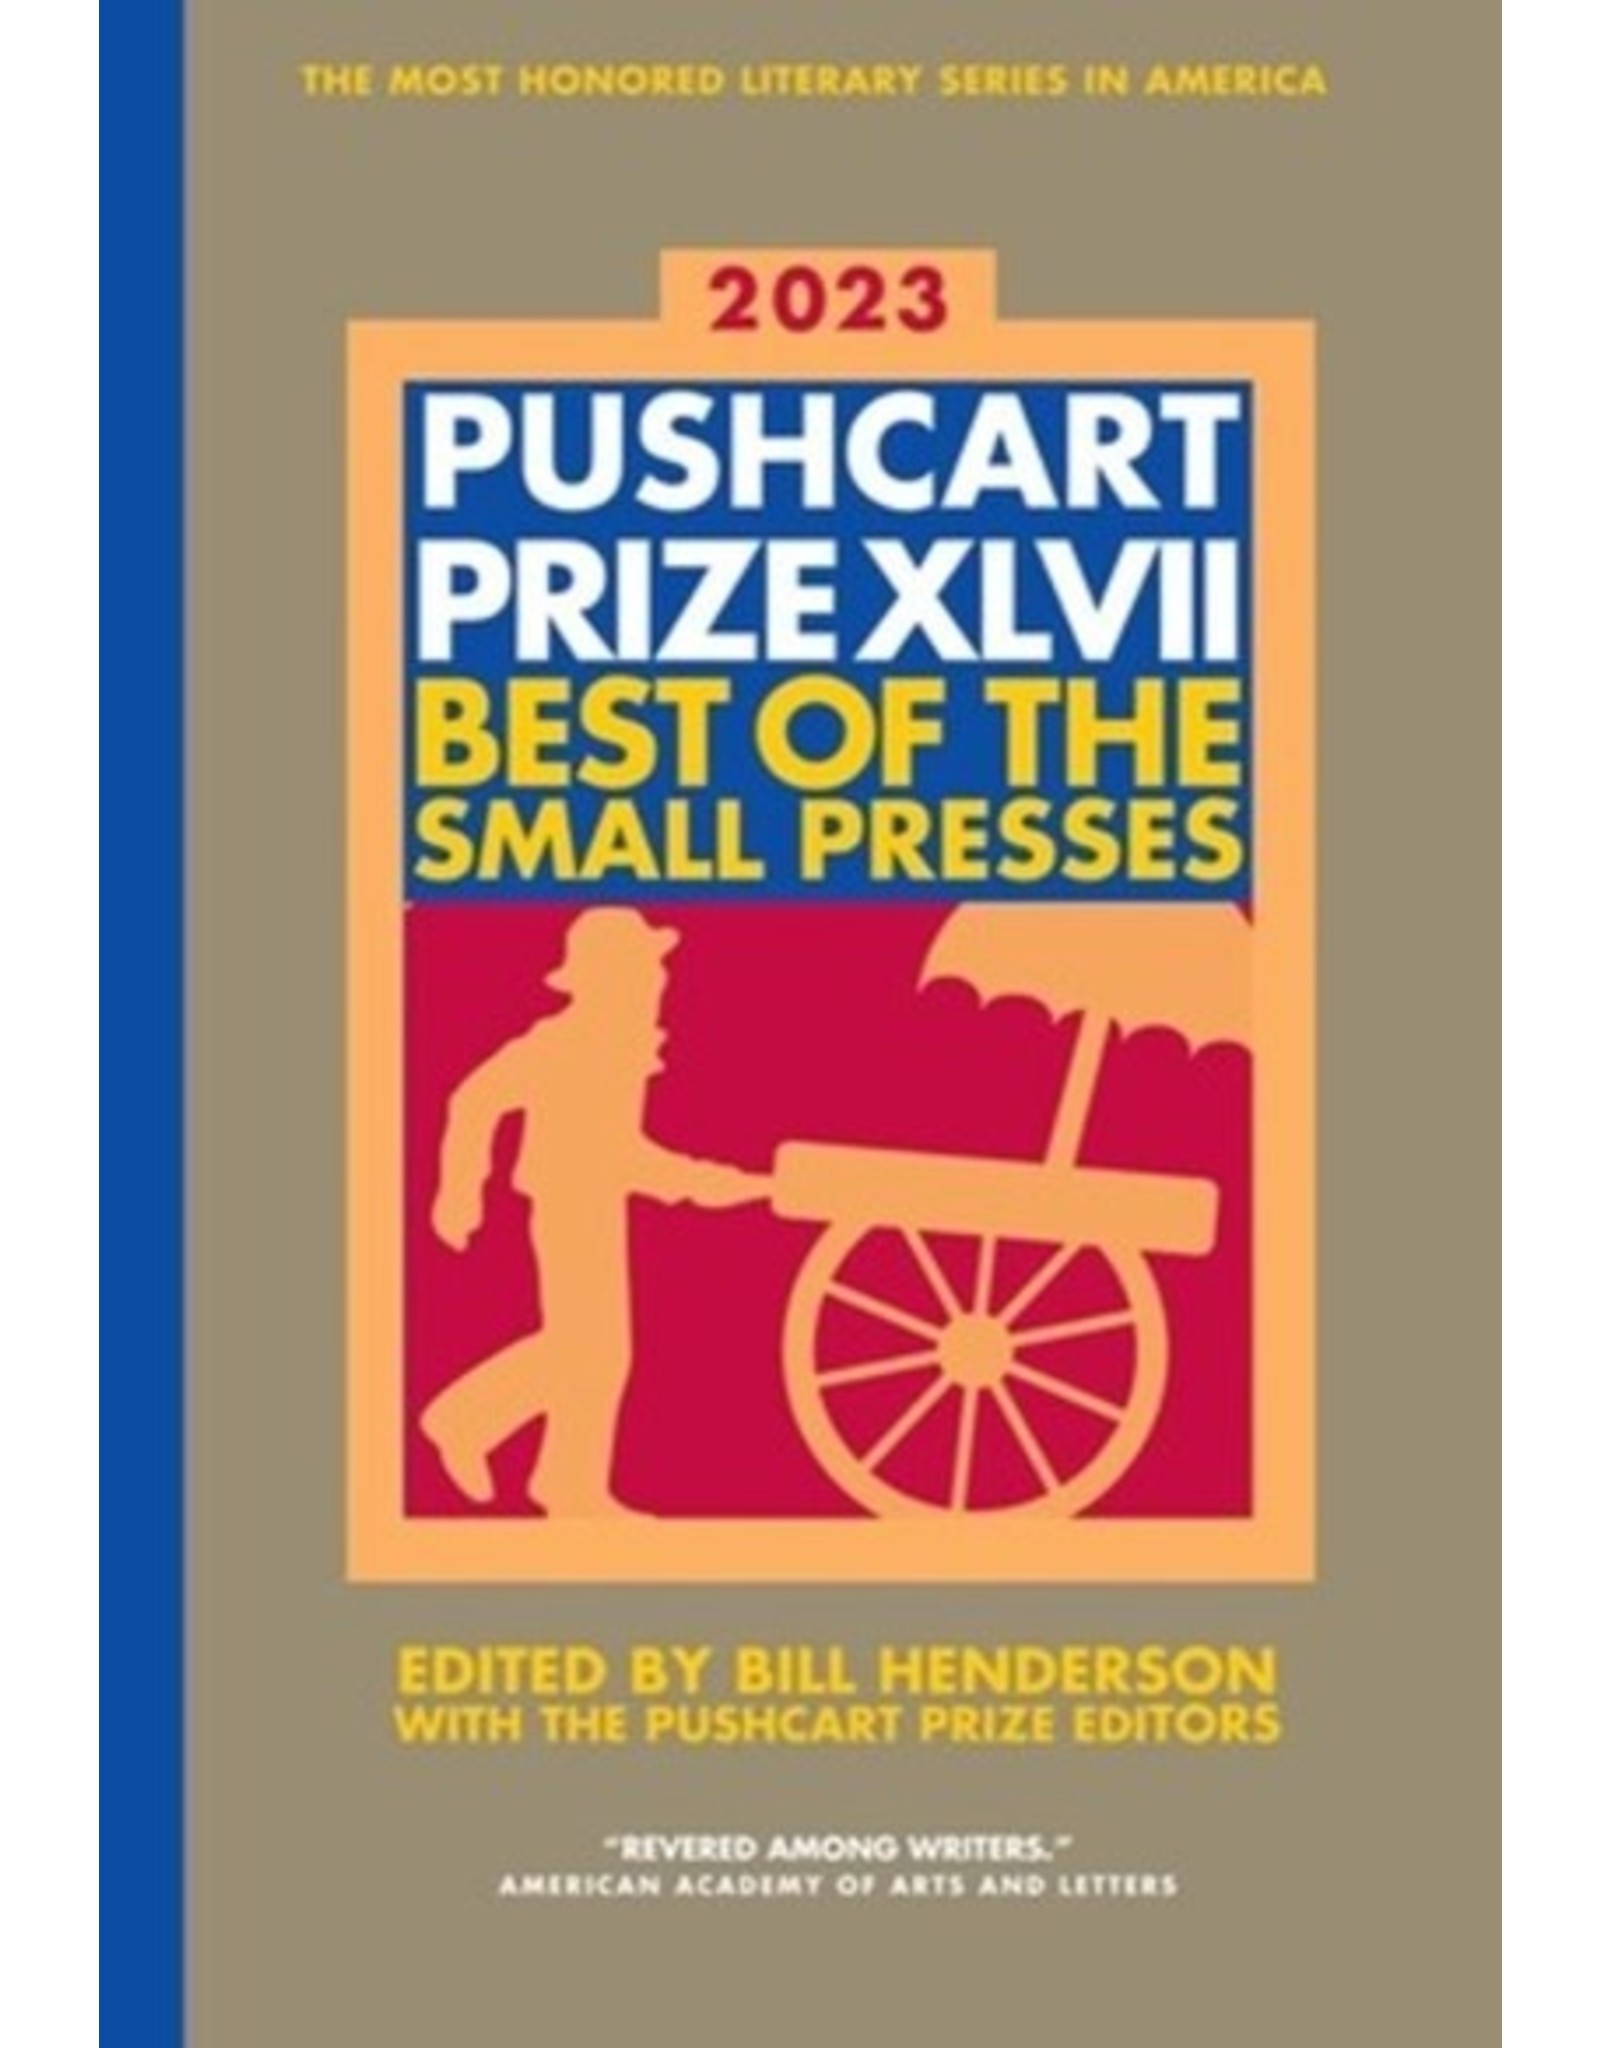 Books 2023 Pushcart Prize XLVII Best of the Small Presses edited by Bill Henderson